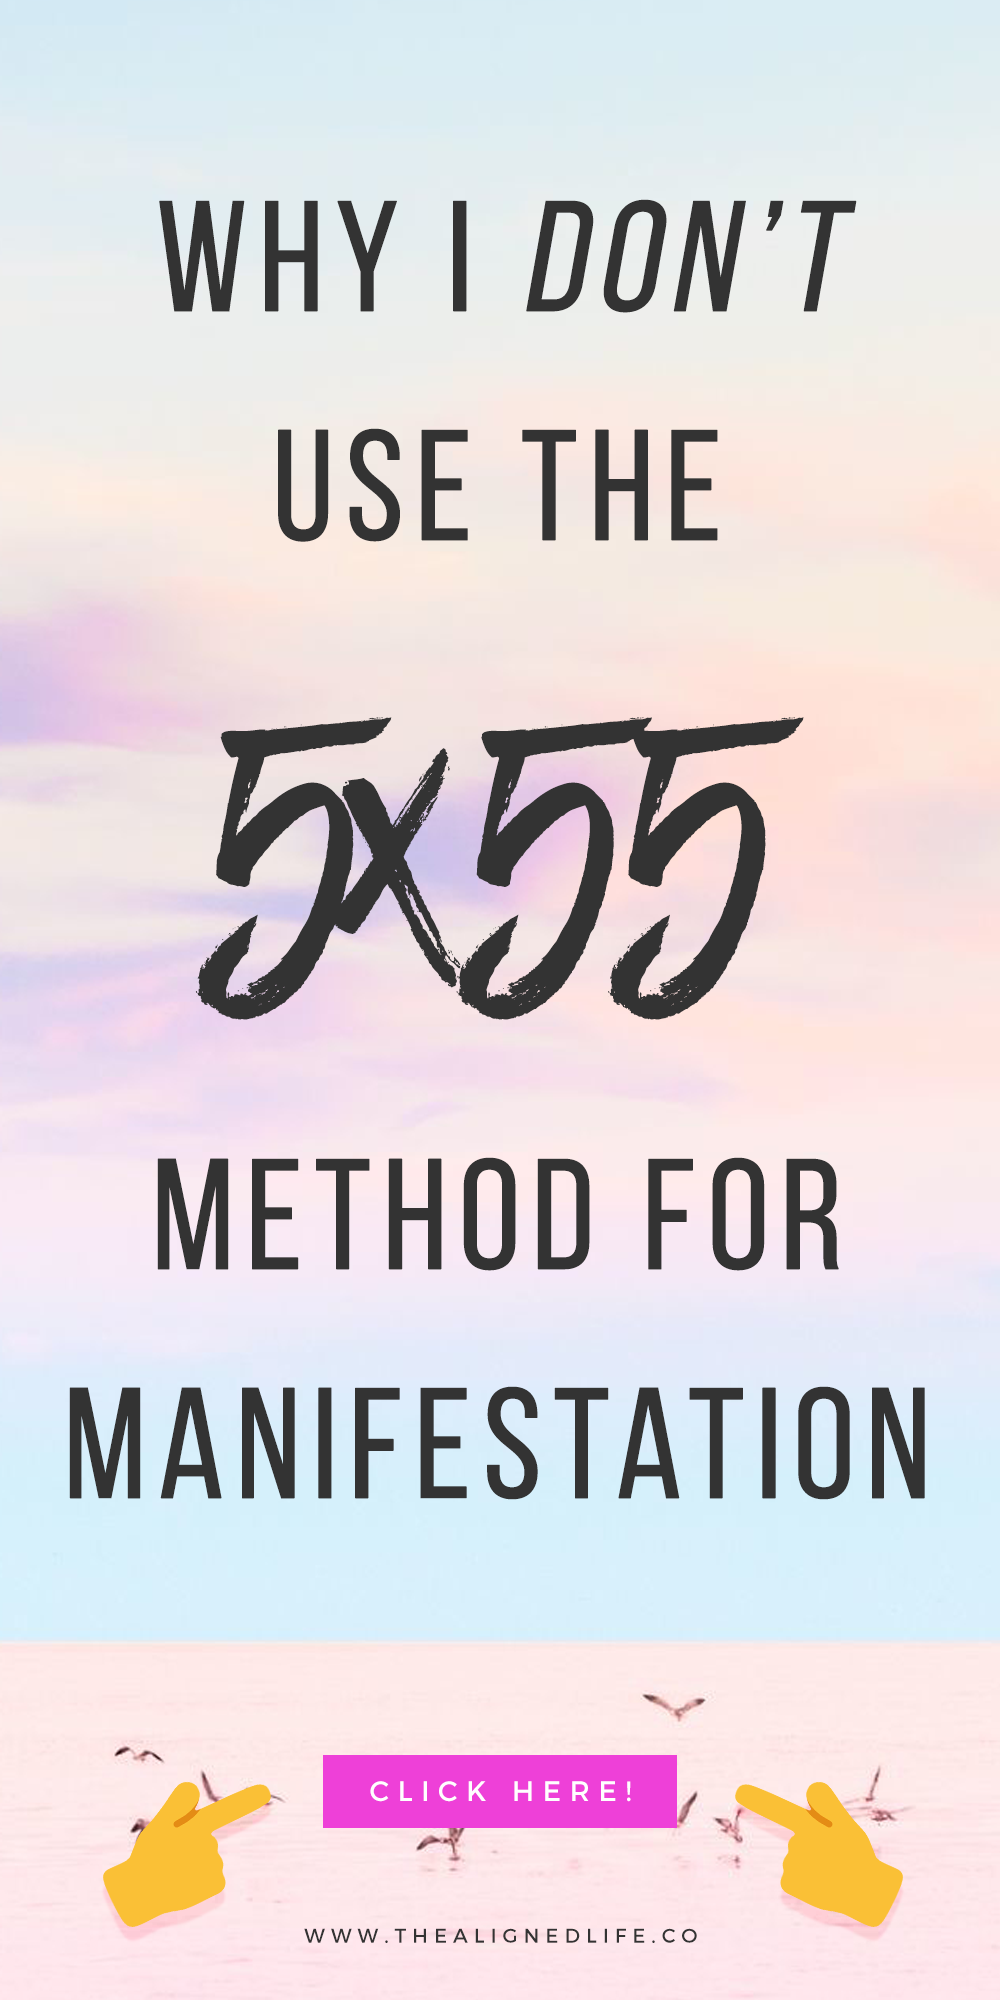 colored background with text that reads Why I Don't Use The 5x55 Method For Manifestation